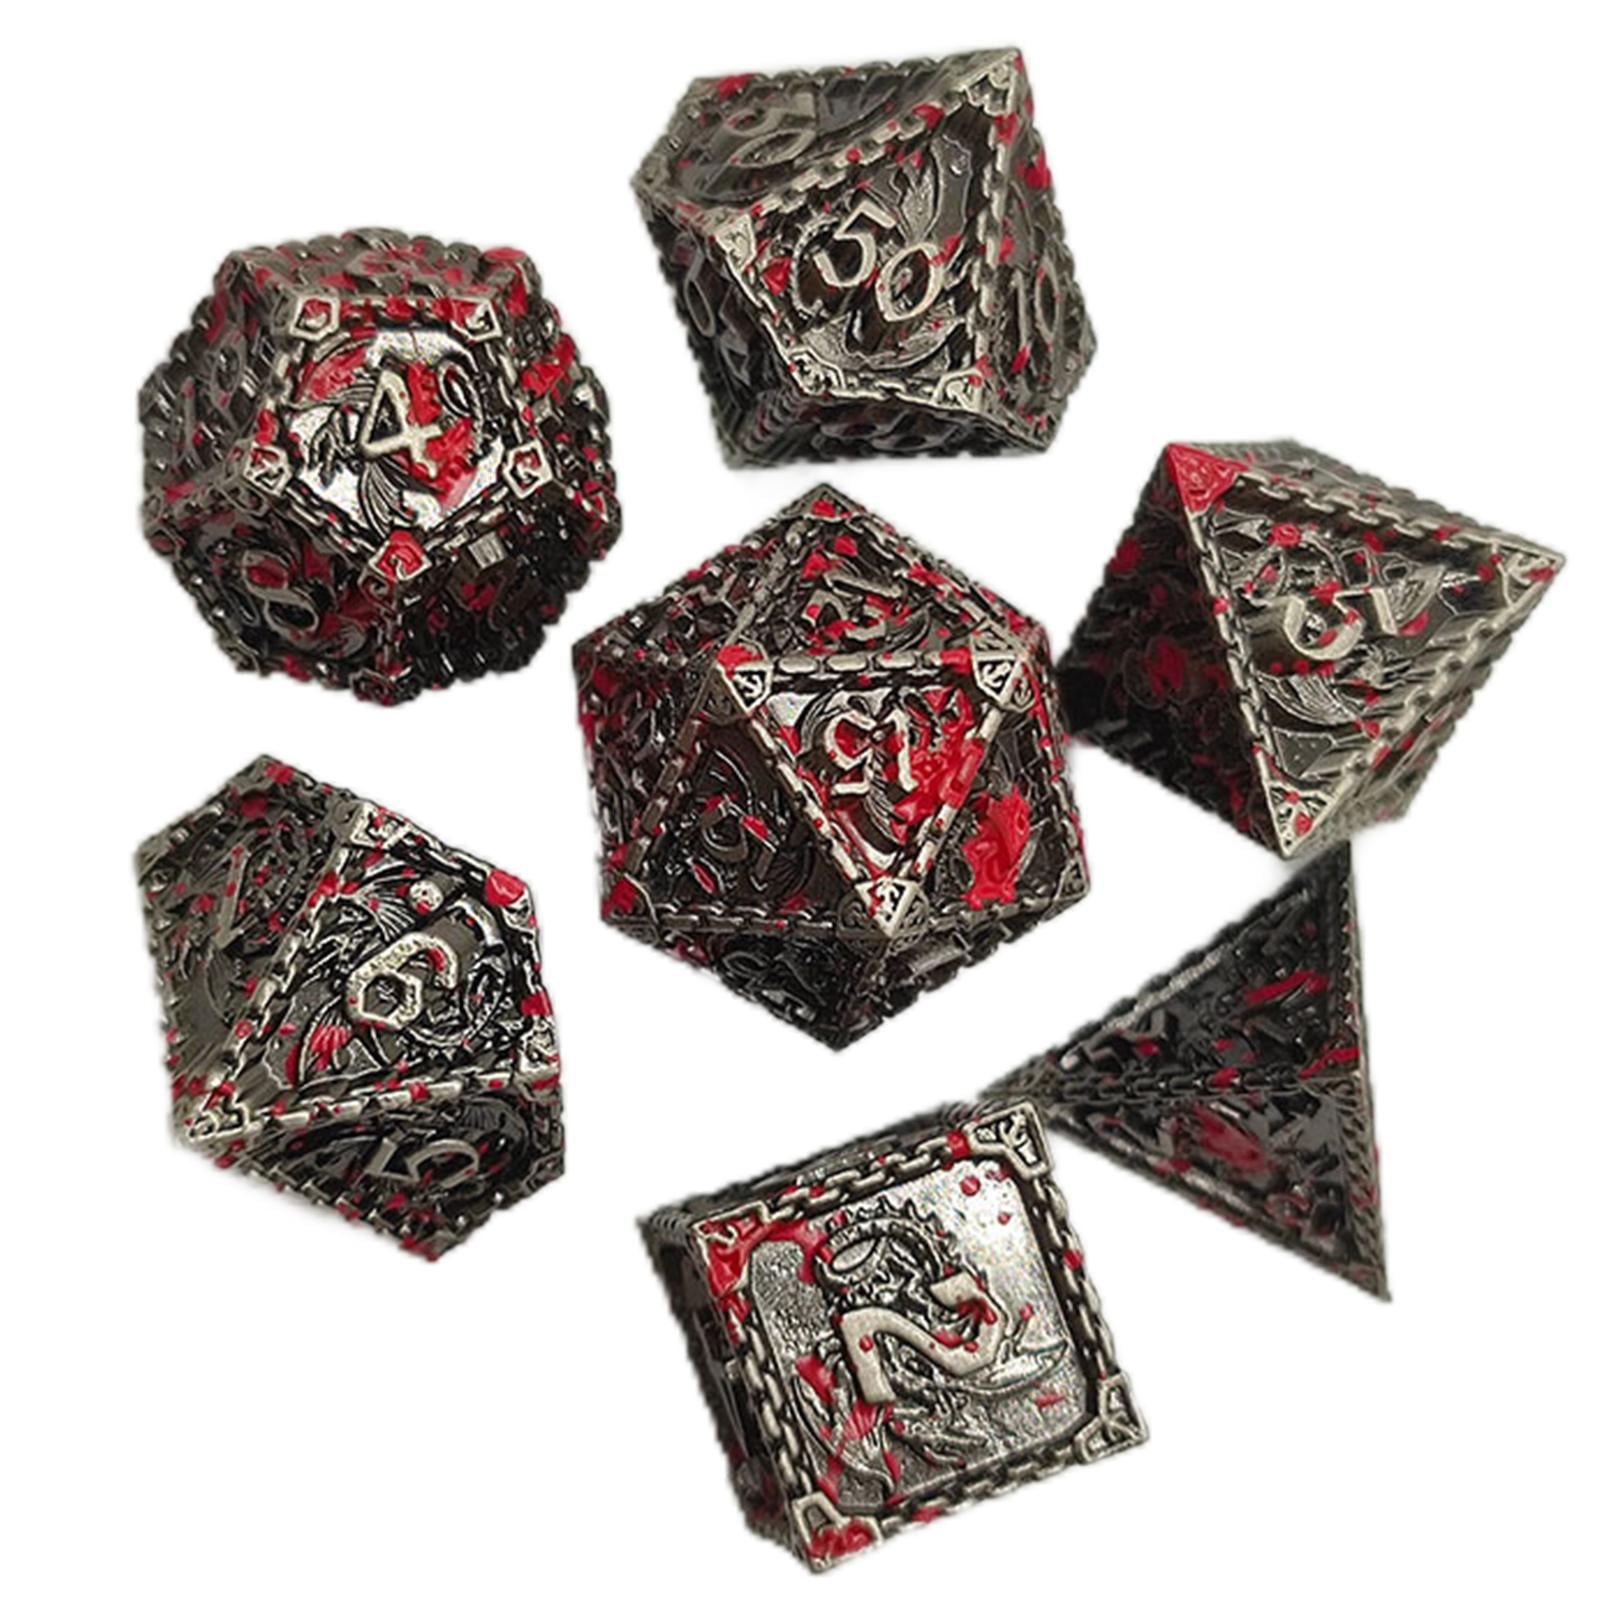 7pcs/set Polyhedral Irregular Multi Sides Numbers Dice Role Playing Board Game